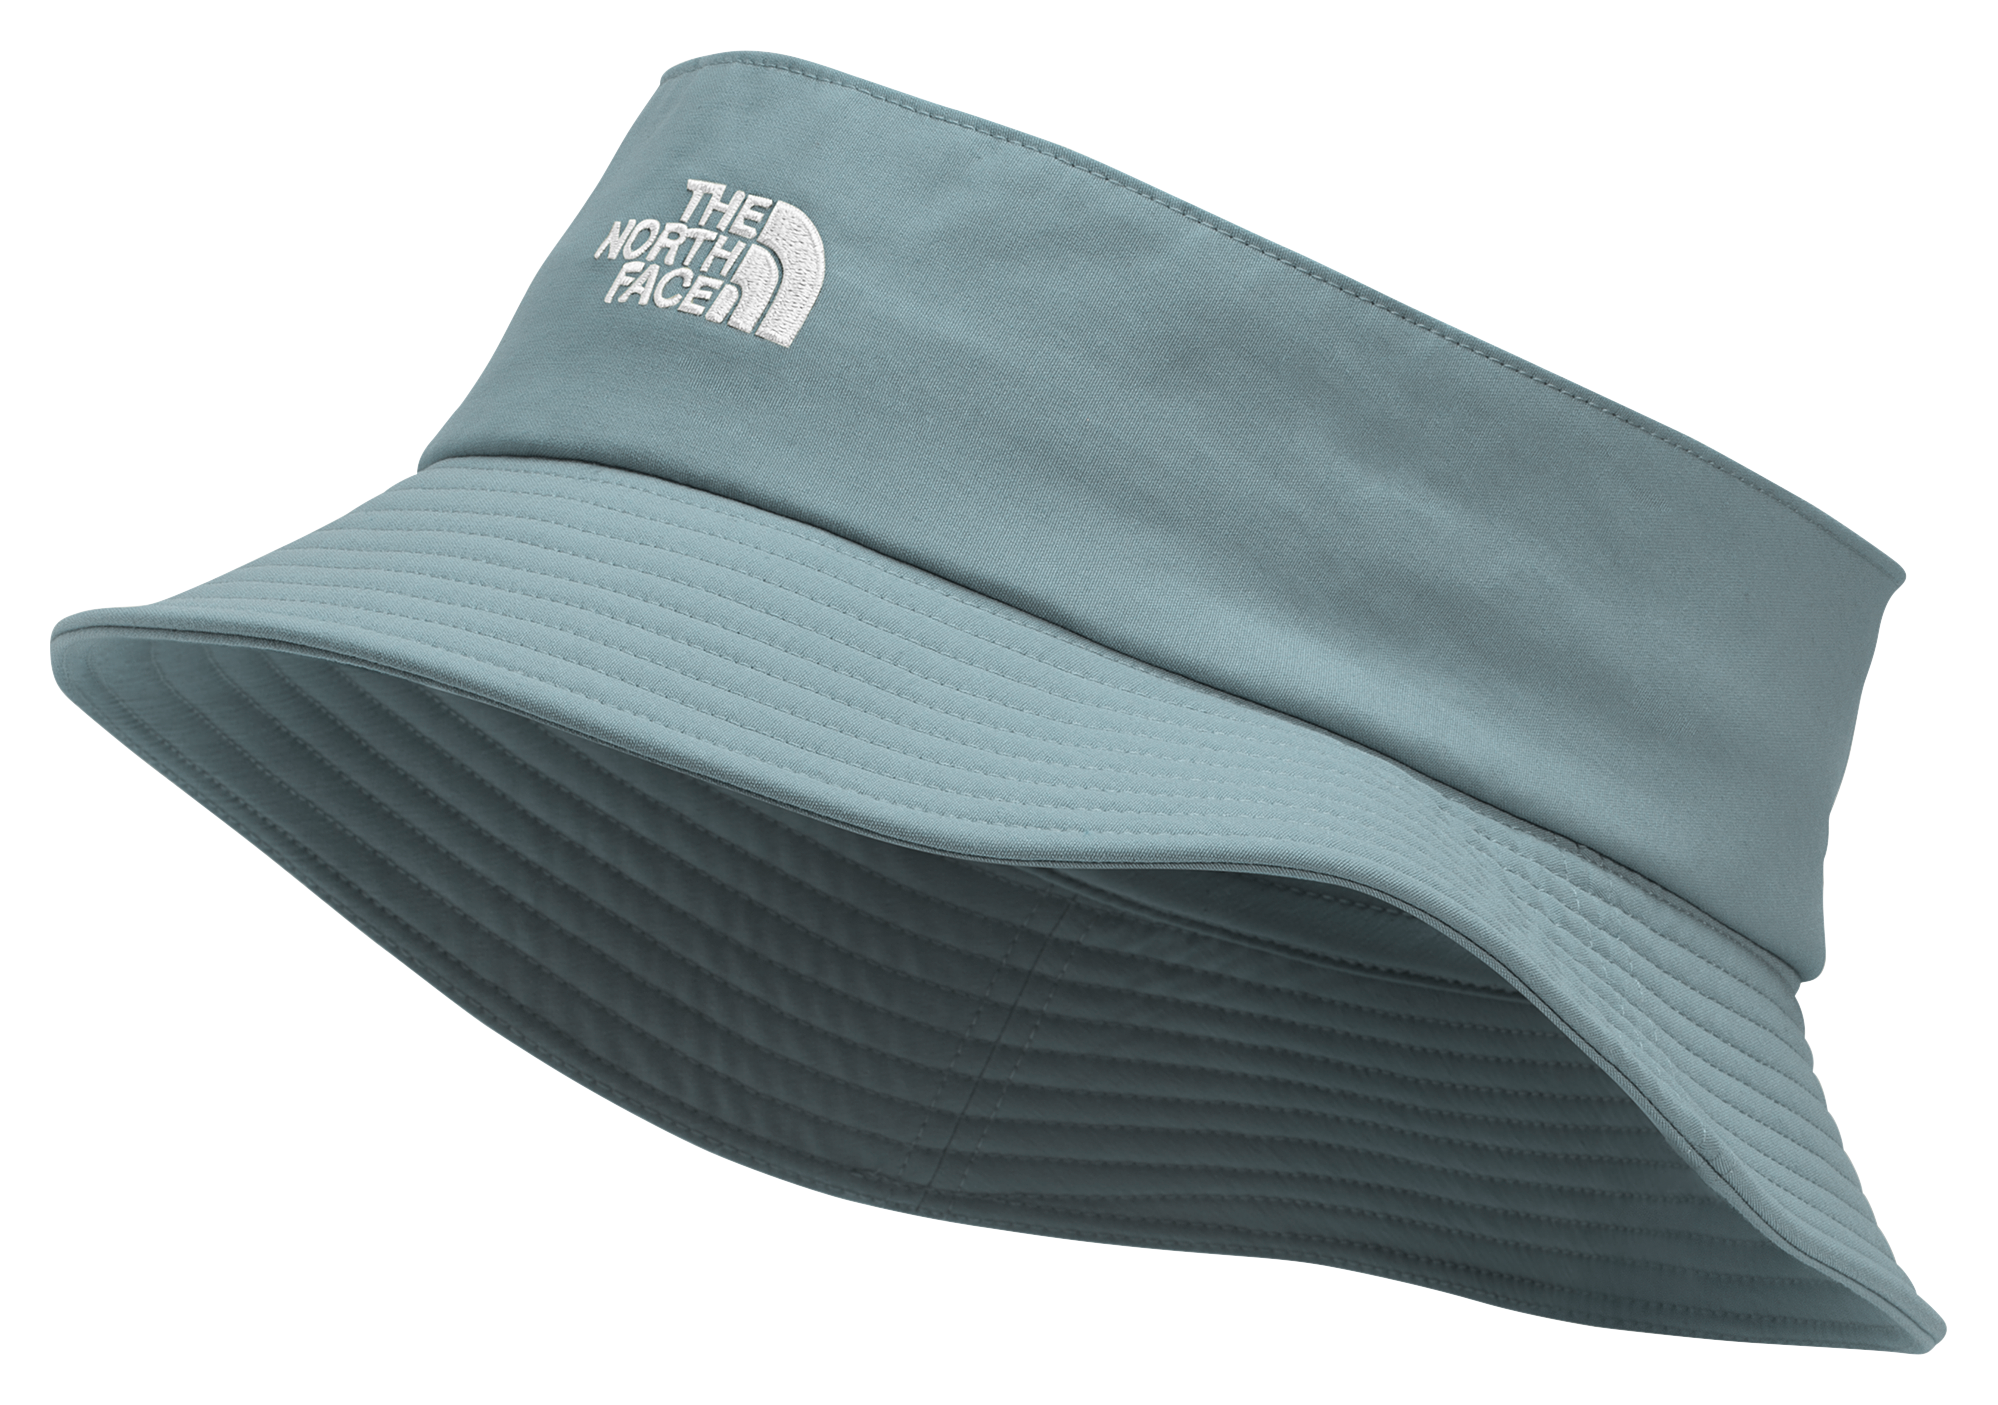 The North Face Class V Top Knot Bucket Hat for Ladies